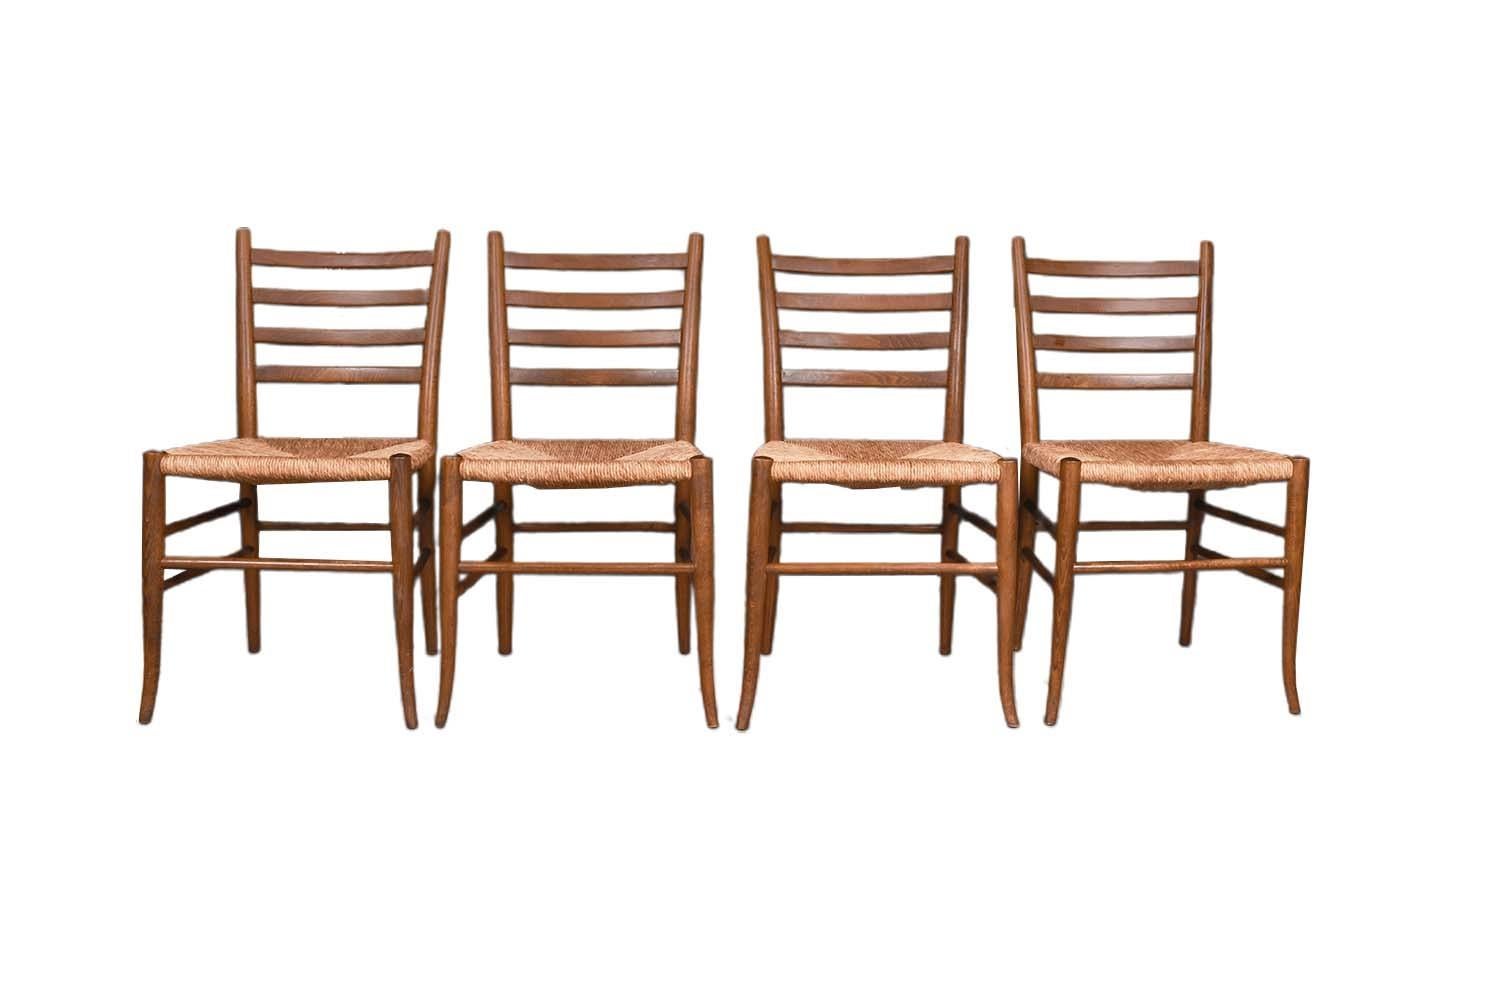 Four beautifully grained walnut Italian ladder back dining side chairs with original rush seats, in the style of Gio Ponti, stamped Made in Italy circa 1960s. Each chair features four tight horizontal ladder back rails, modernist subtle curved sabre